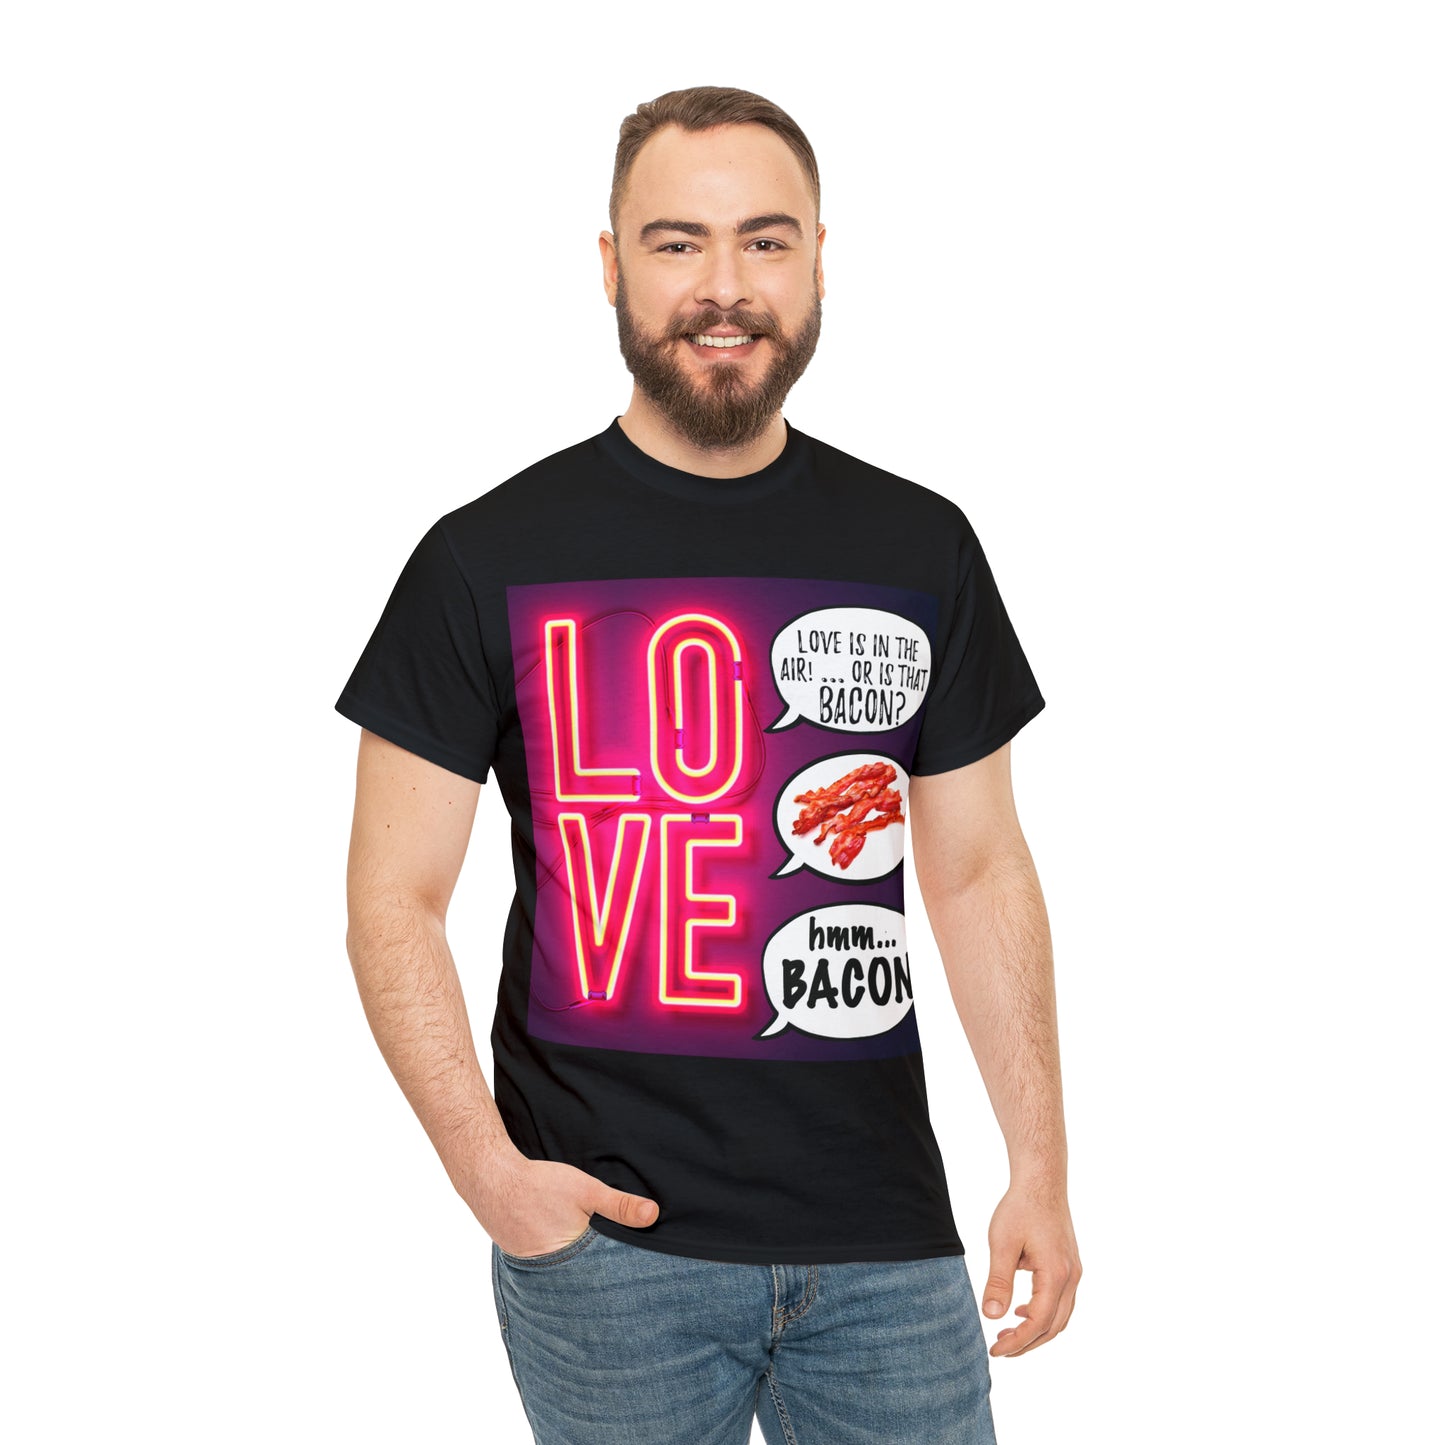 LOVE in in the AIR... or is that BACON? - Unisex Heavy Cotton Tee